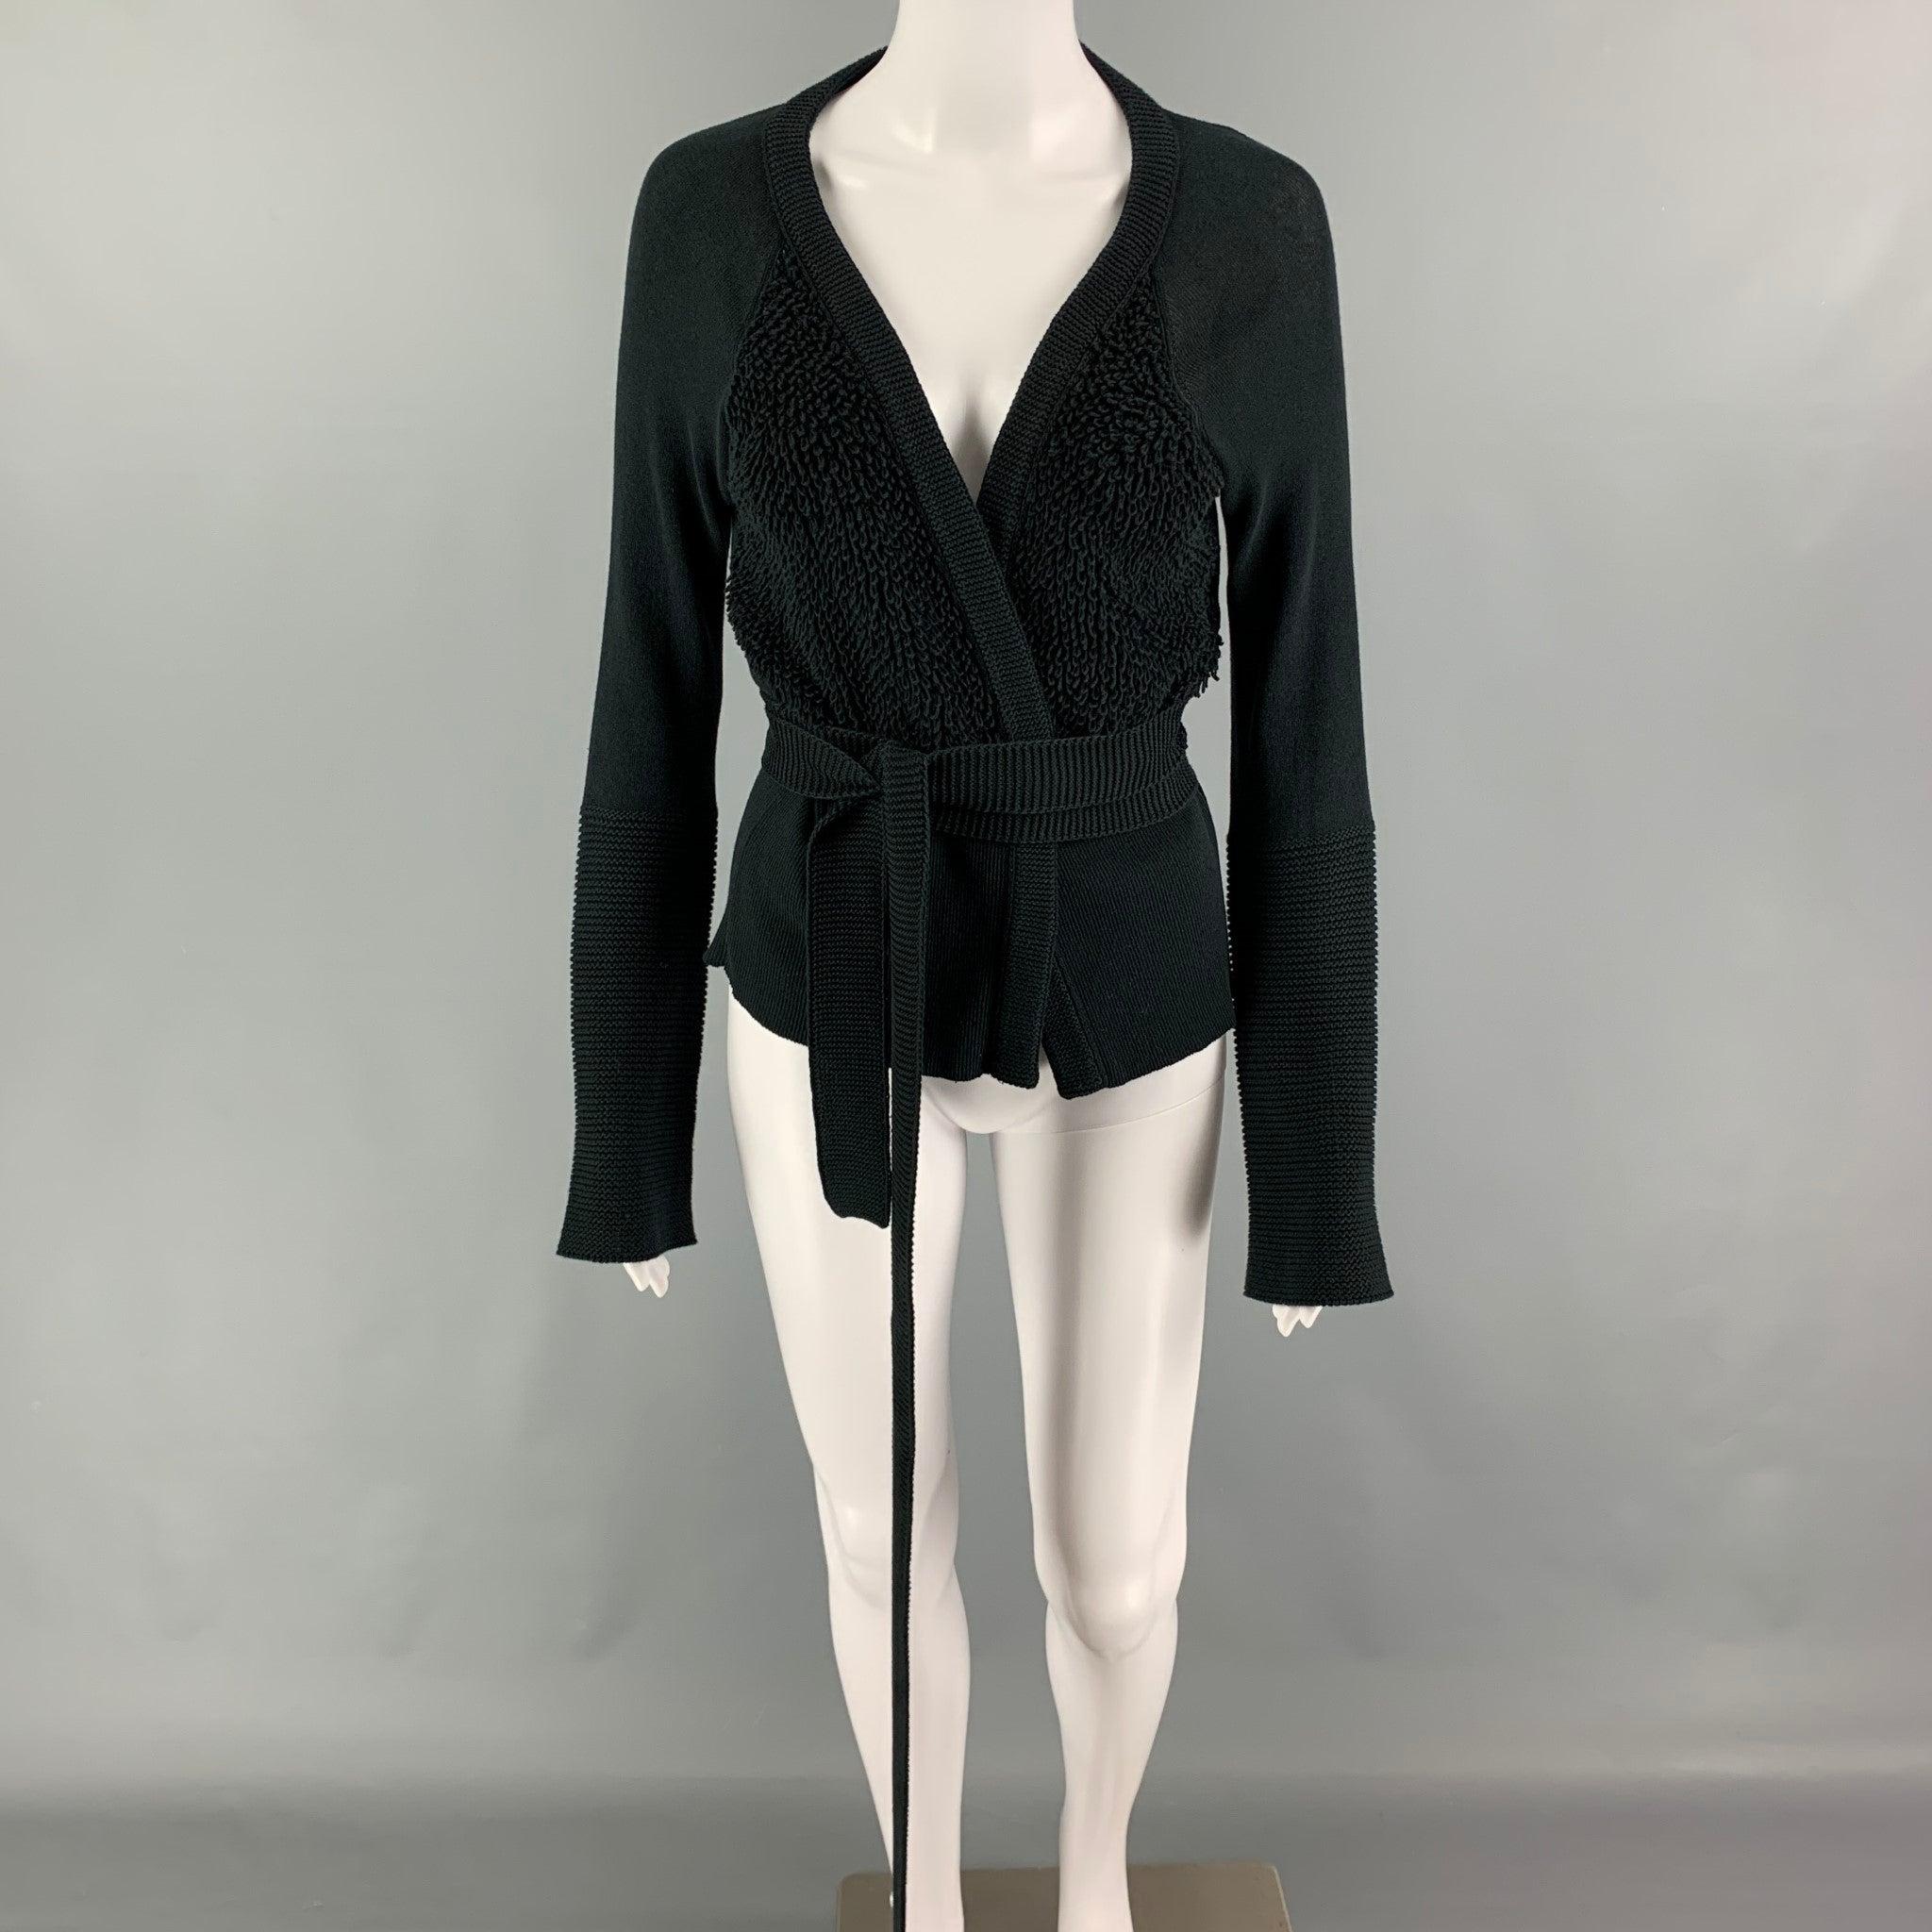 SONIA RYKIEL cardigan comes in a black cotton featuring textured panels, long sleeves, and a open front. Made in Italy.
Very Good
Pre-Owned Condition. 

Marked:   42 

Measurements: 
 
Shoulder: 16 inches Bust: 34 inches Sleeve: 25 inches Length: 21